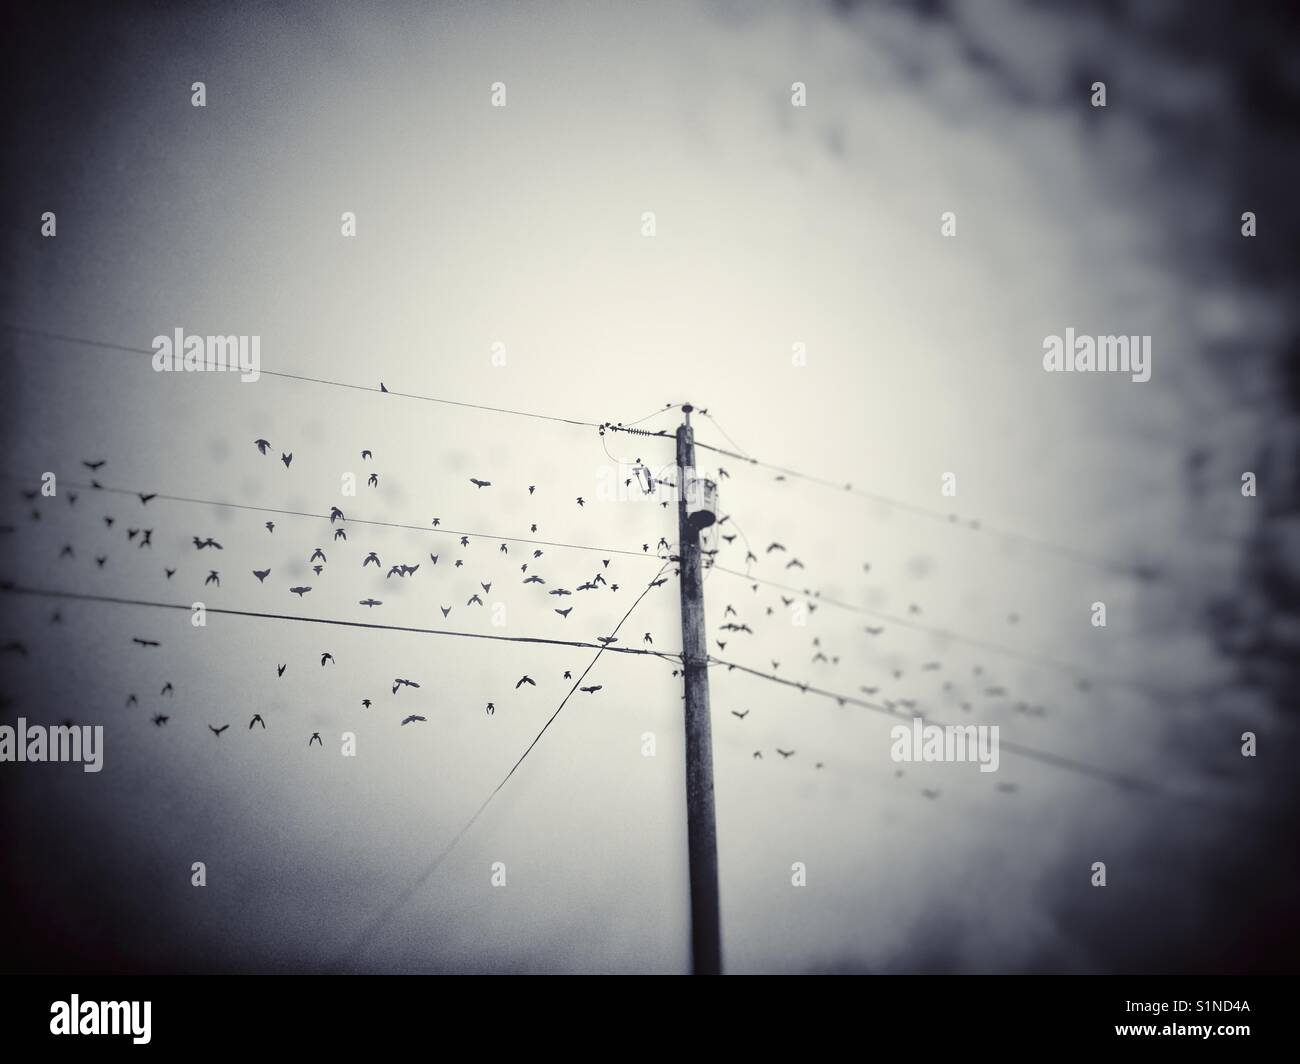 Flock of Starling birds taking off from electrical pole on a dreary overcast day. British Columbia, Canada. Stock Photo